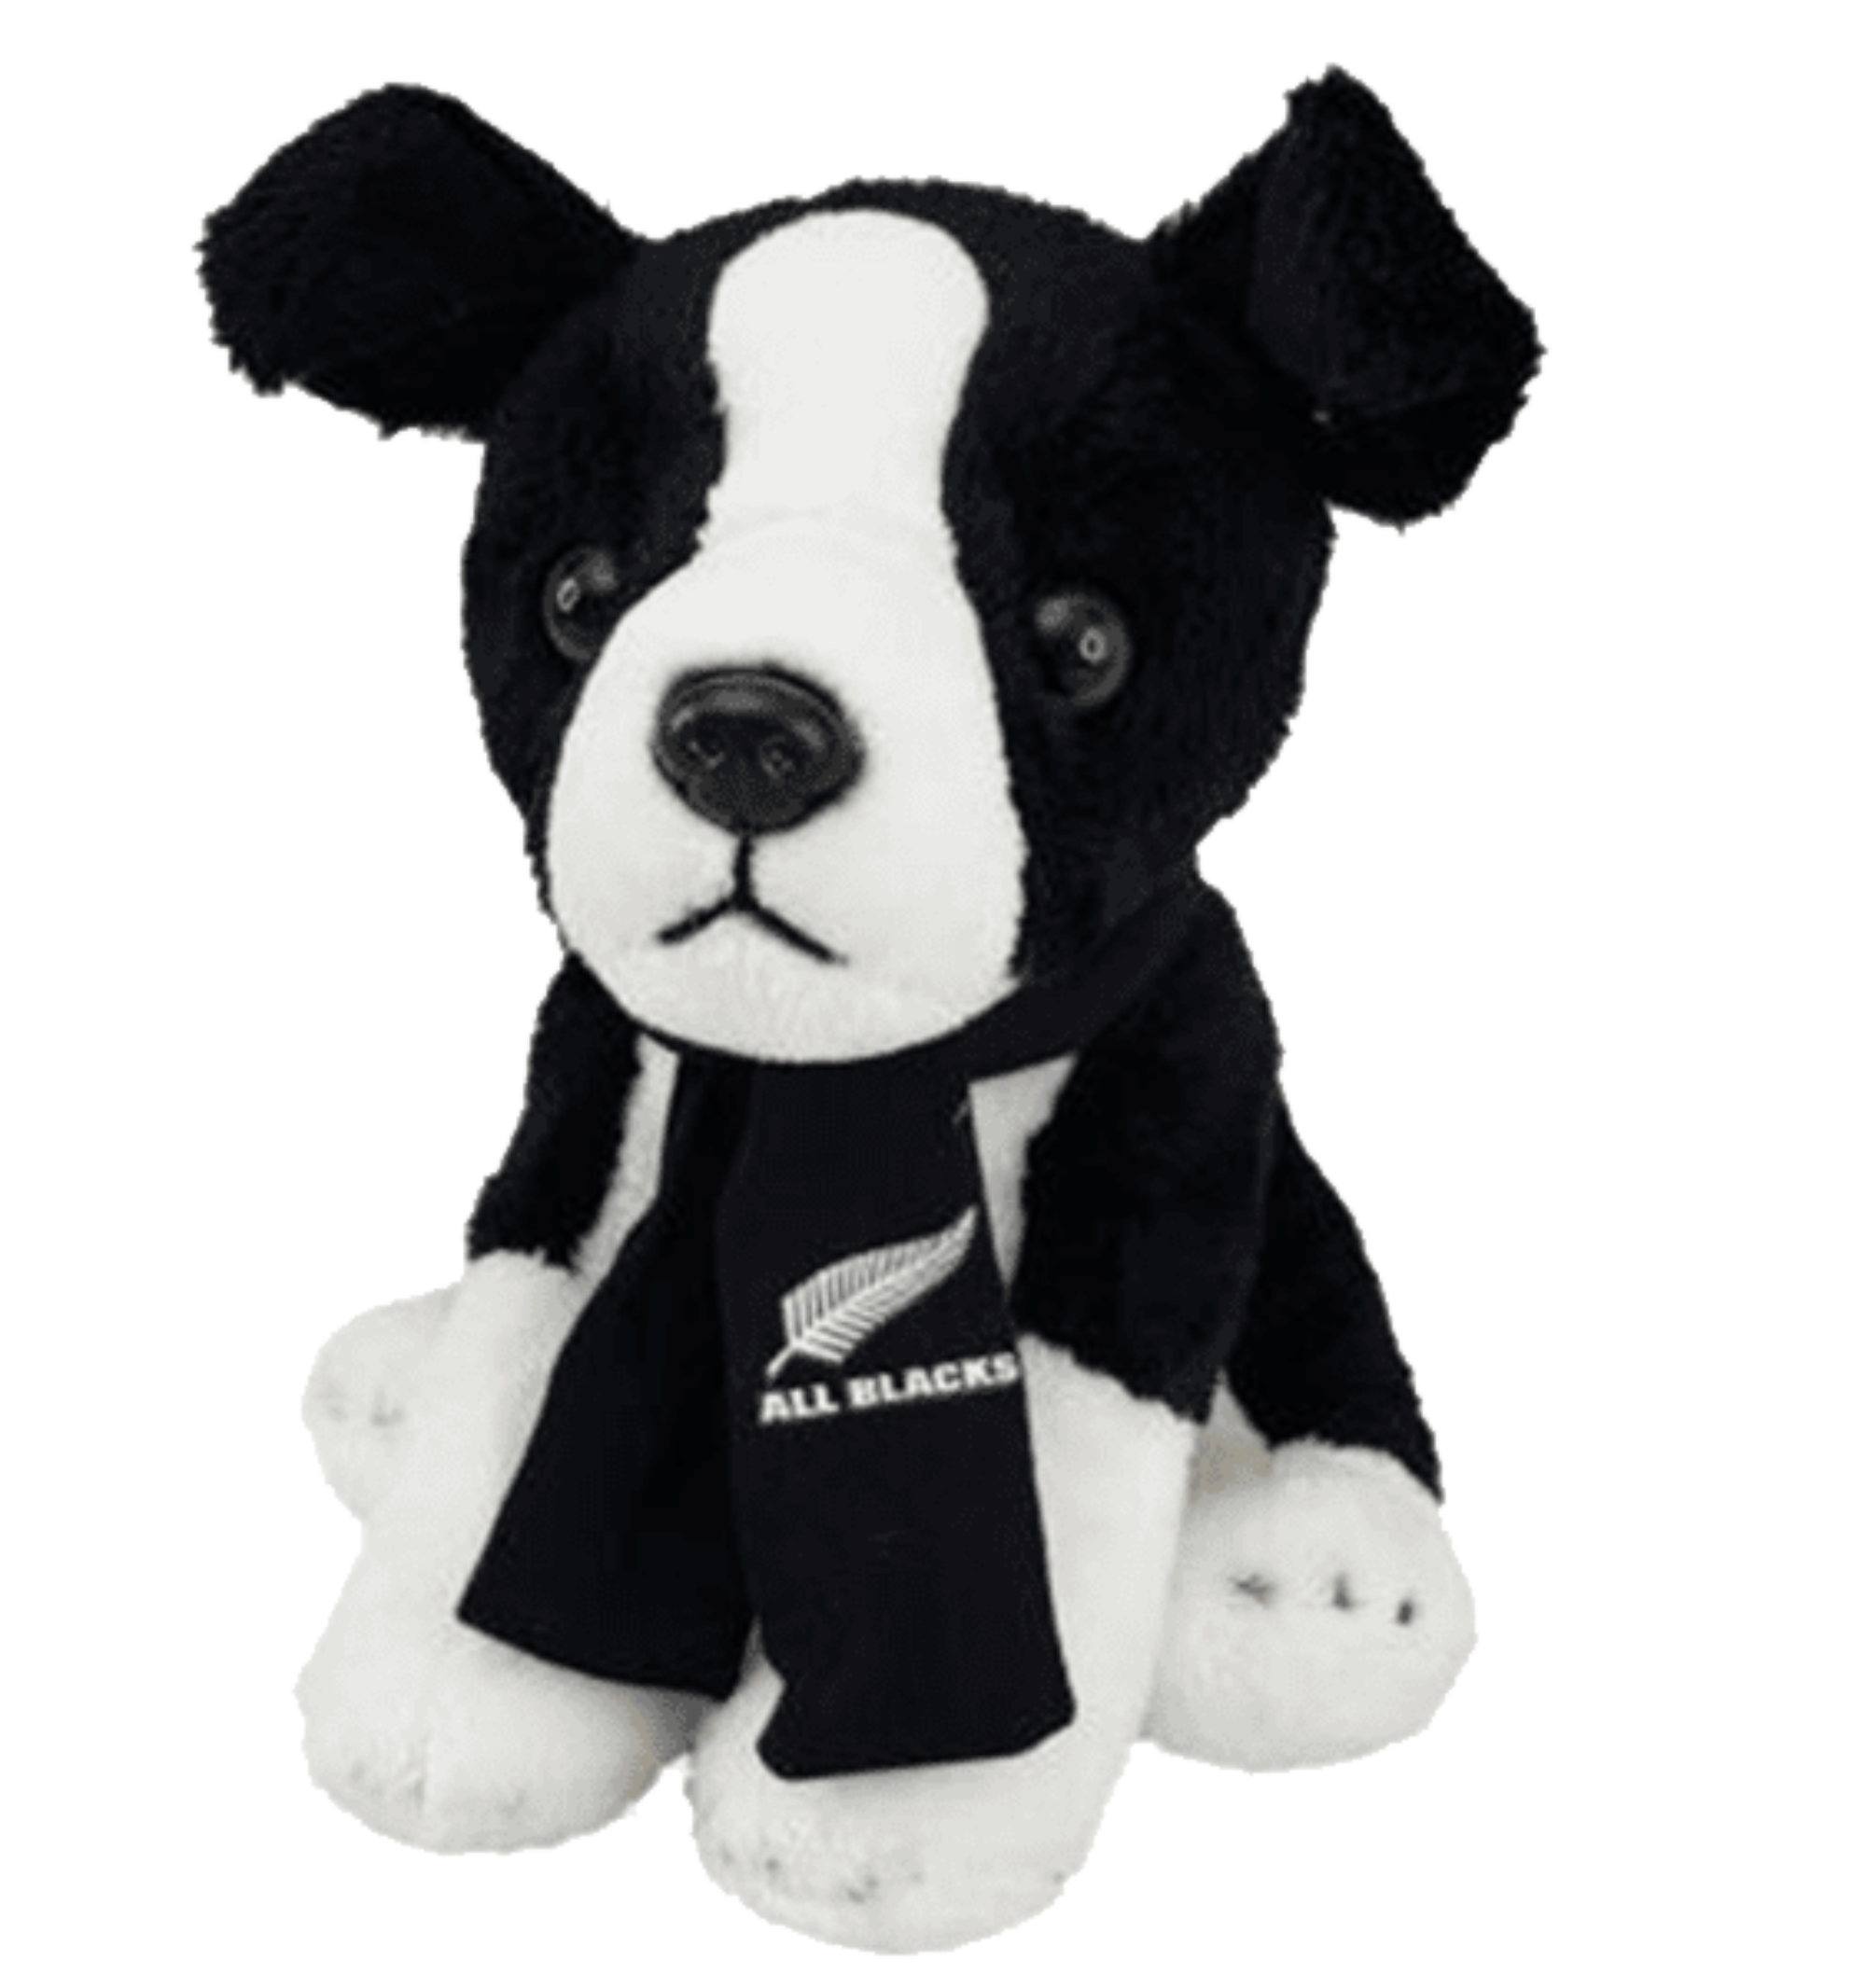 Image of All Blacks Rugby Faithful Fan Plush Toy Puppy Officially Licensed